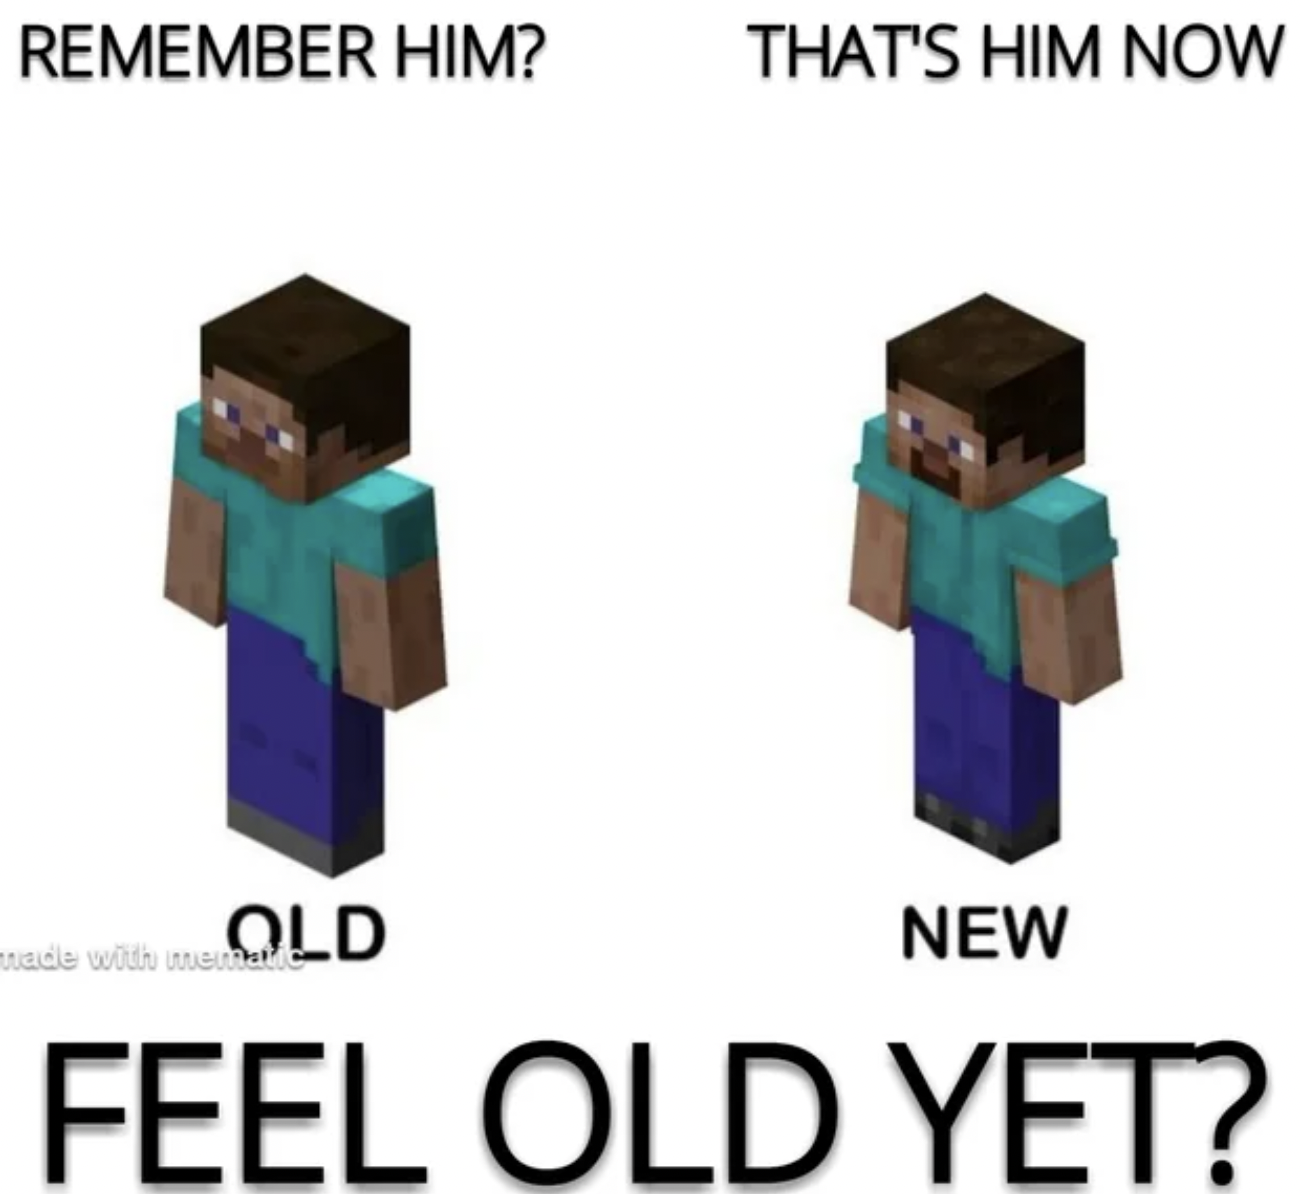 Minecraft Memes - i m so glad i grew up - Remember Him? That'S Him Now made with me Ld New Feel Old Yet?